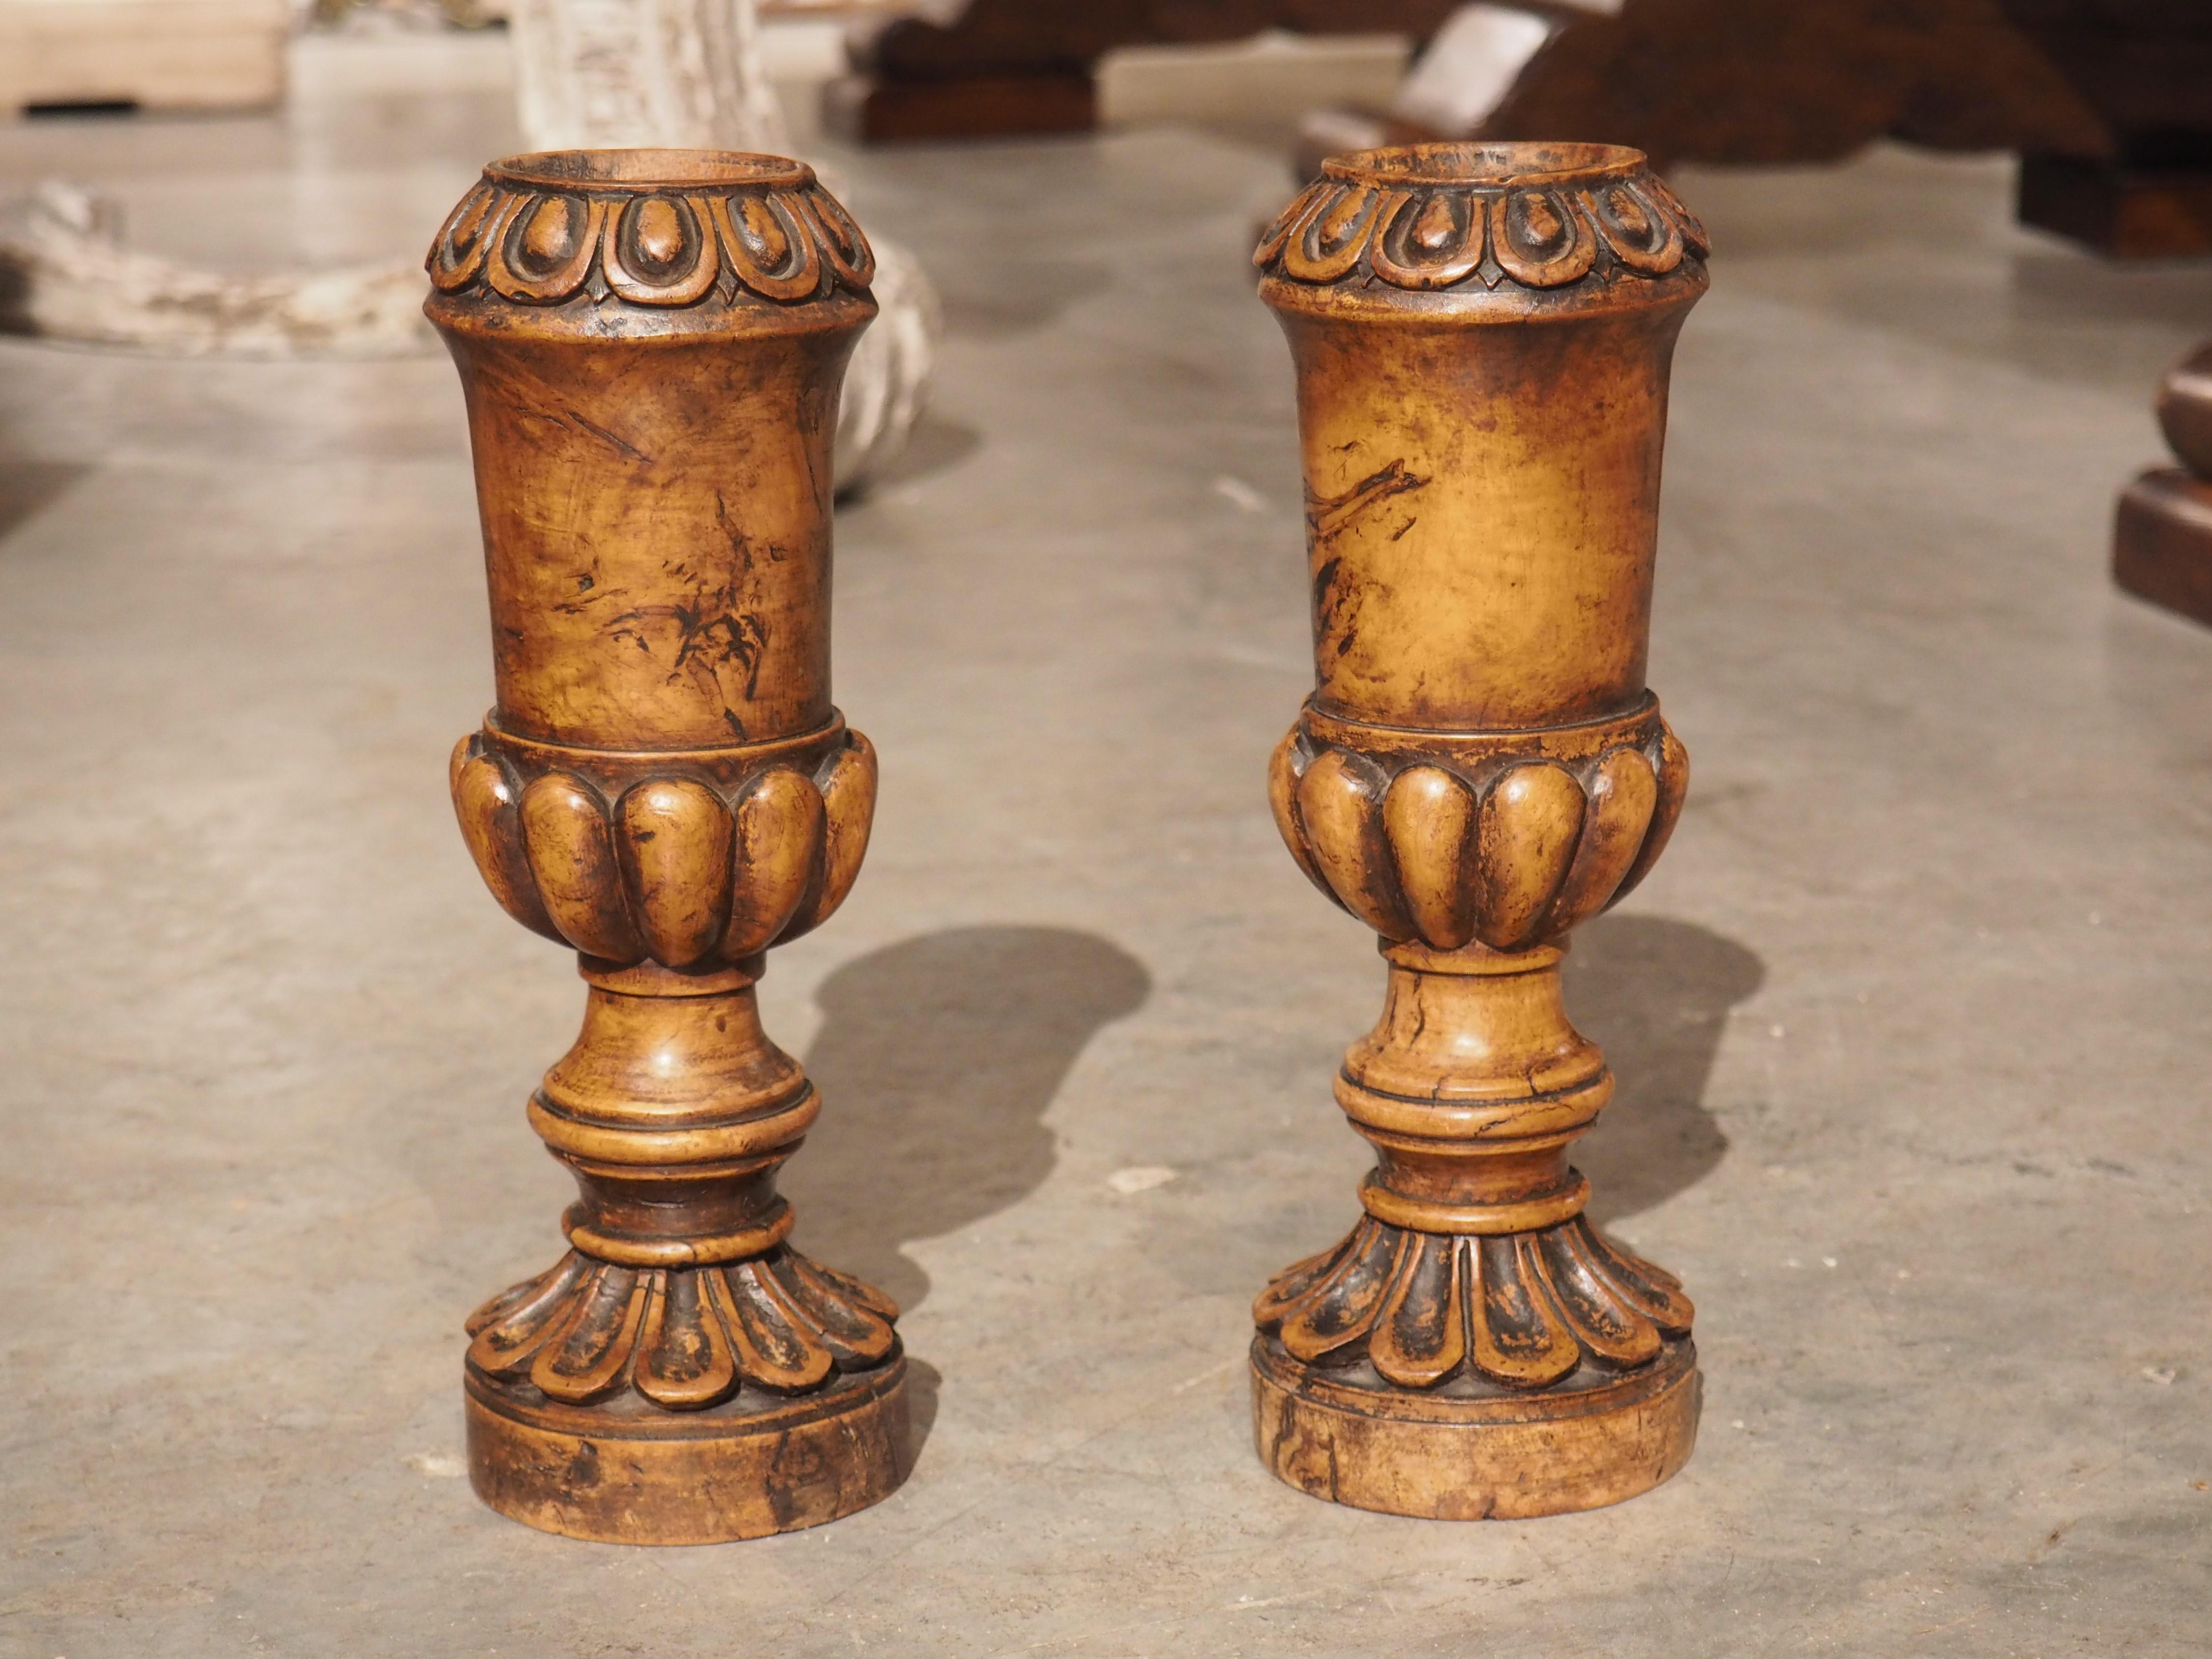 Pair of circa 1820 Carved Walnut Spill Vases from England For Sale 9